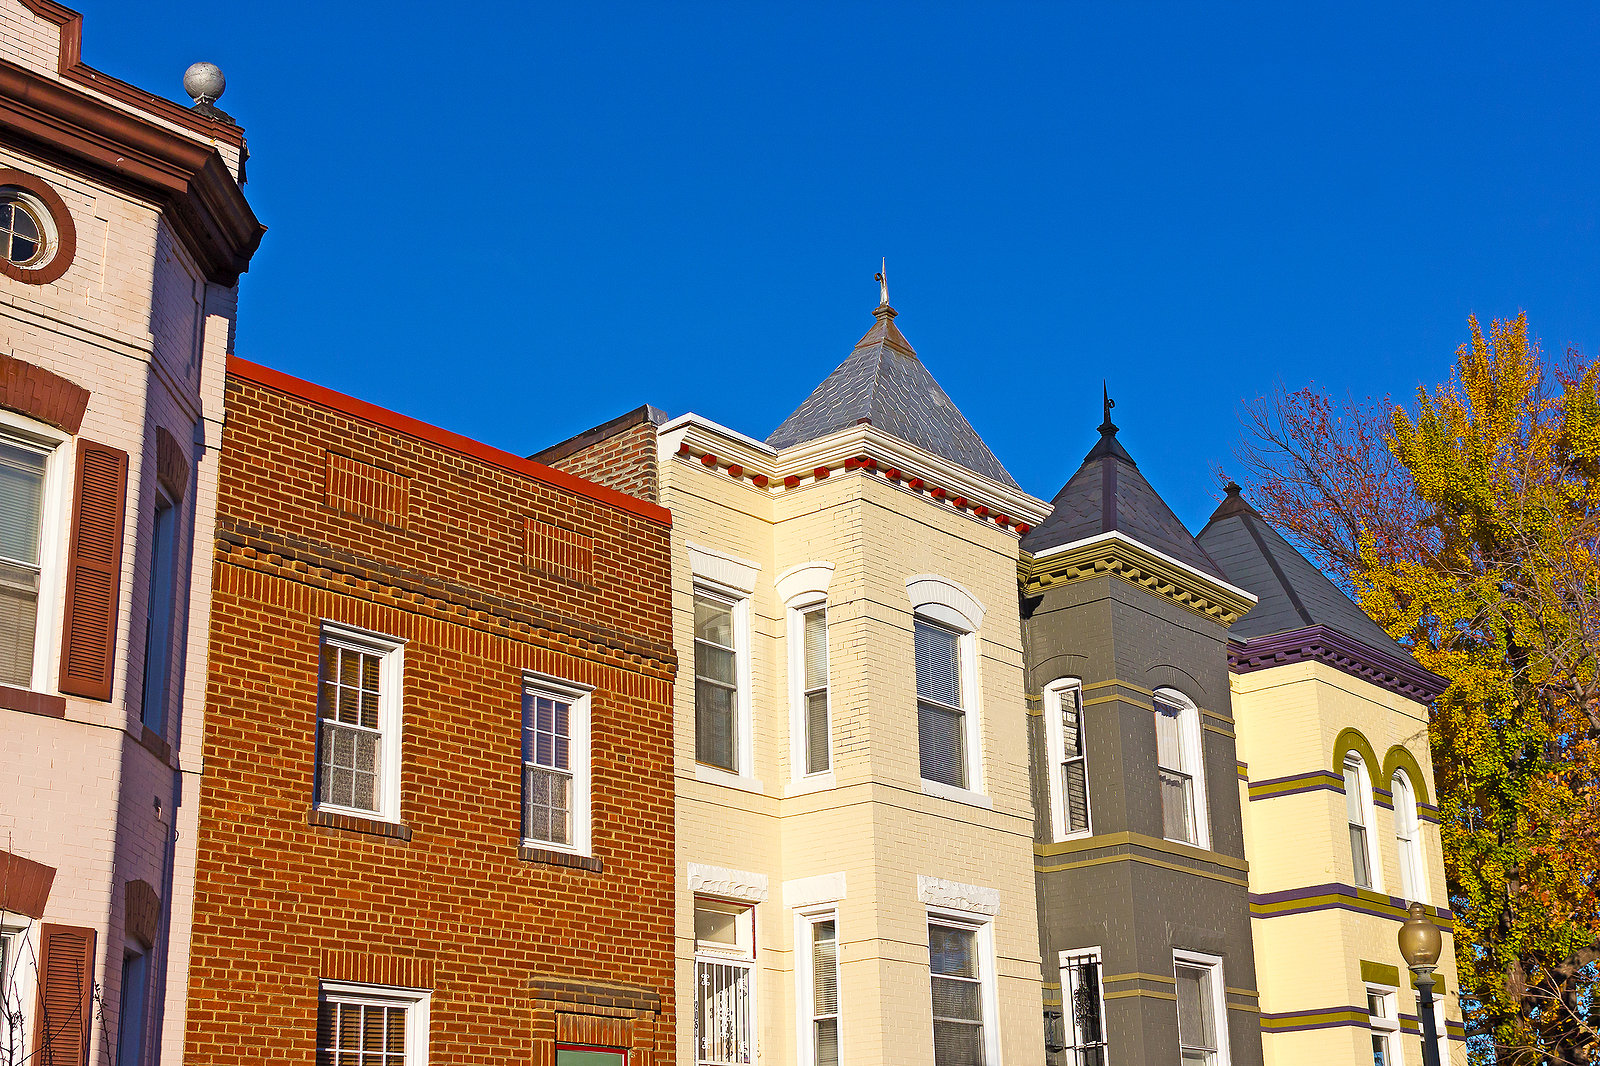 Fall-Inspection-of-Your-Historic-Brick-Home-A-Homeowners-Checklist-Renaissance-Development-DC